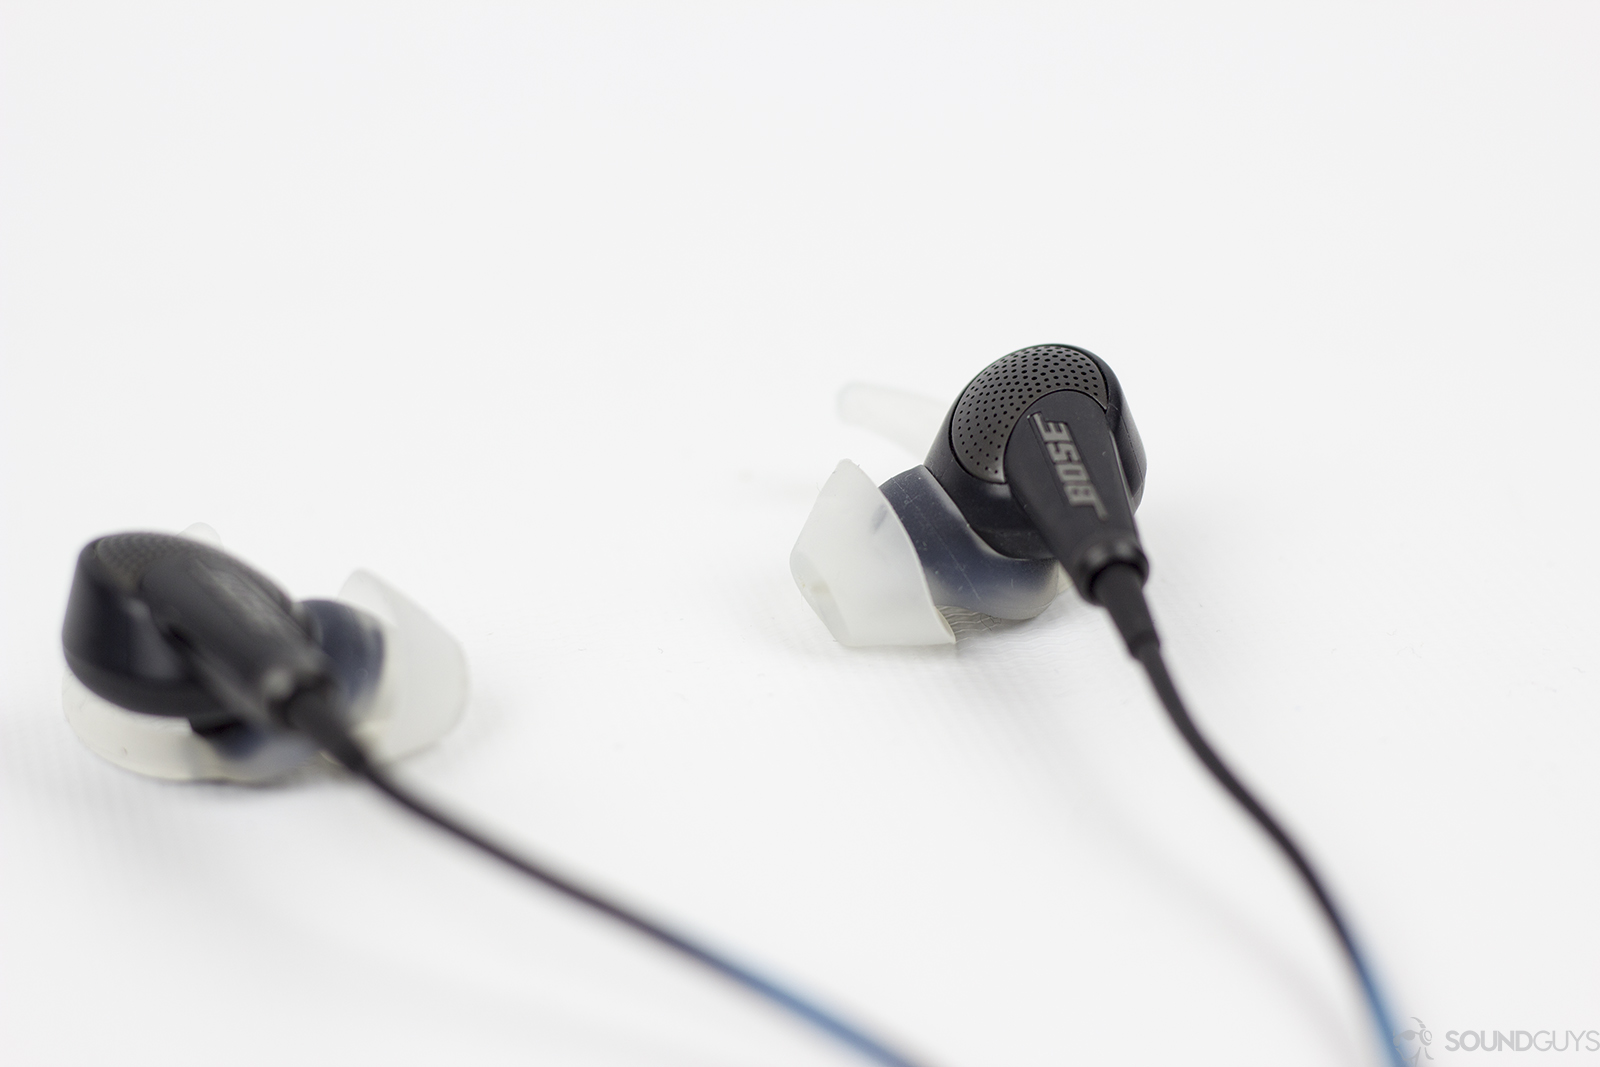 Bose QC 20 noise canceling earbuds on white surface.